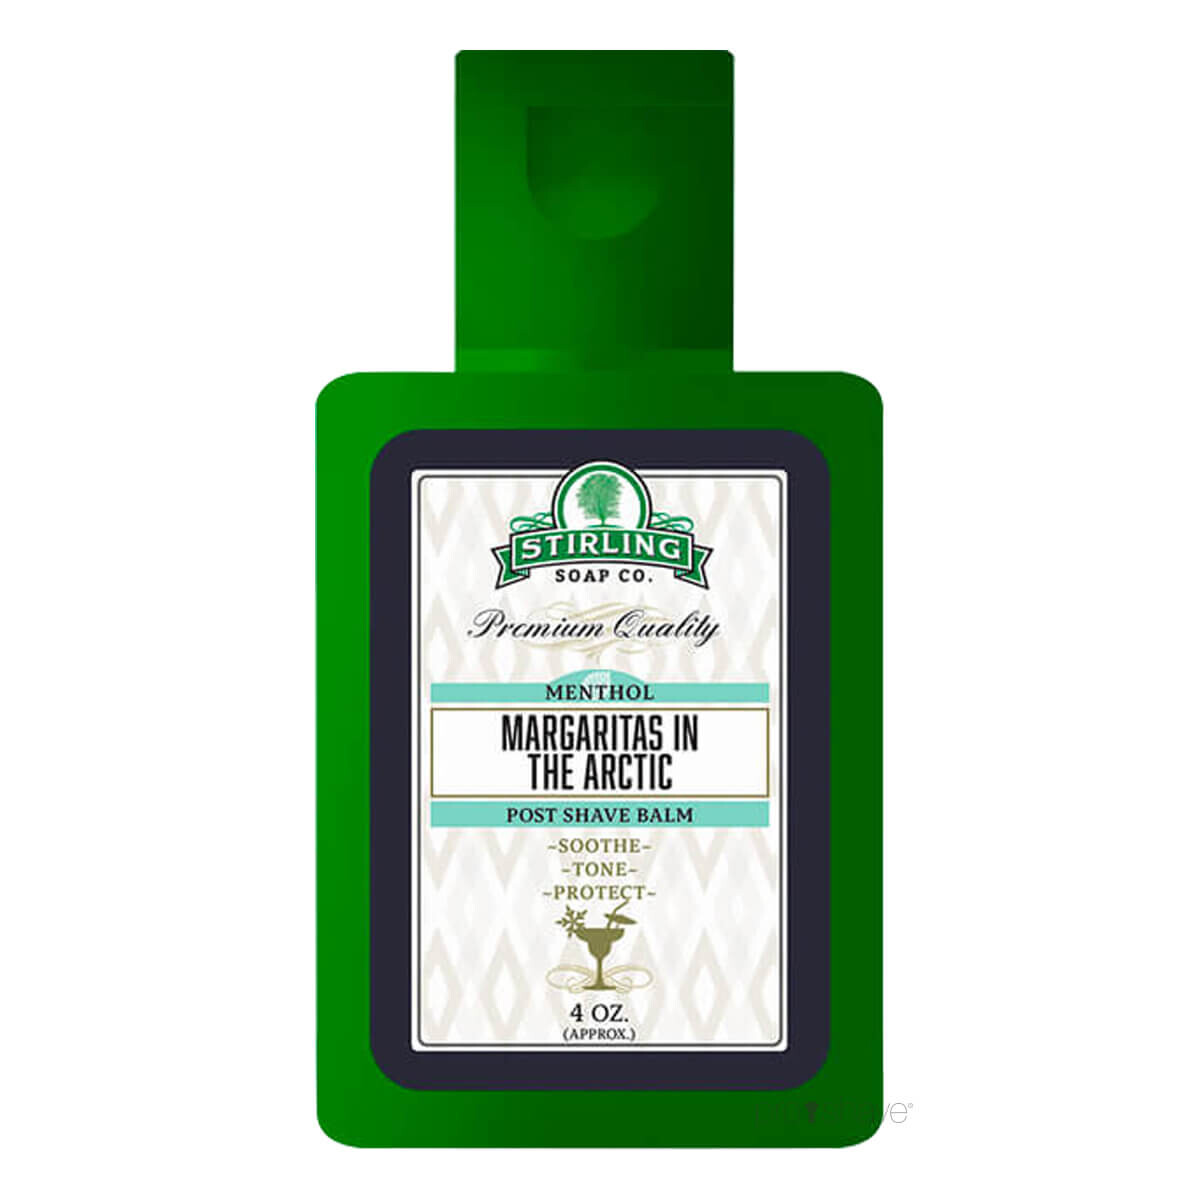 Stirling Soap Co. Aftershave Balm, Margaritas in the Arctic, 118 ml.